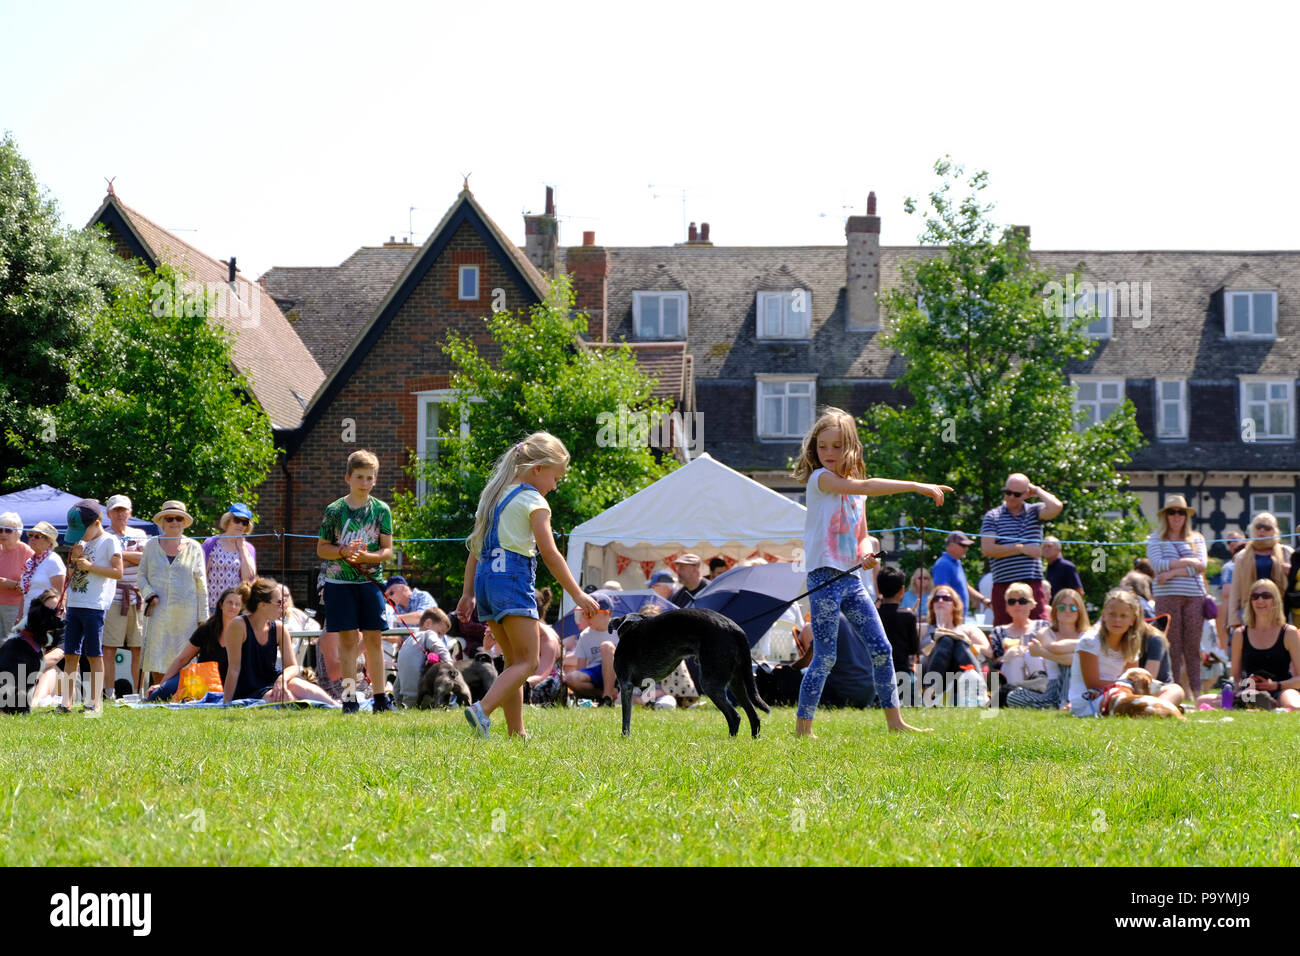 East Preston, West Sussex, UK. Fun dog show held on village green. Young girls showing their pet three legged dog. Stock Photo